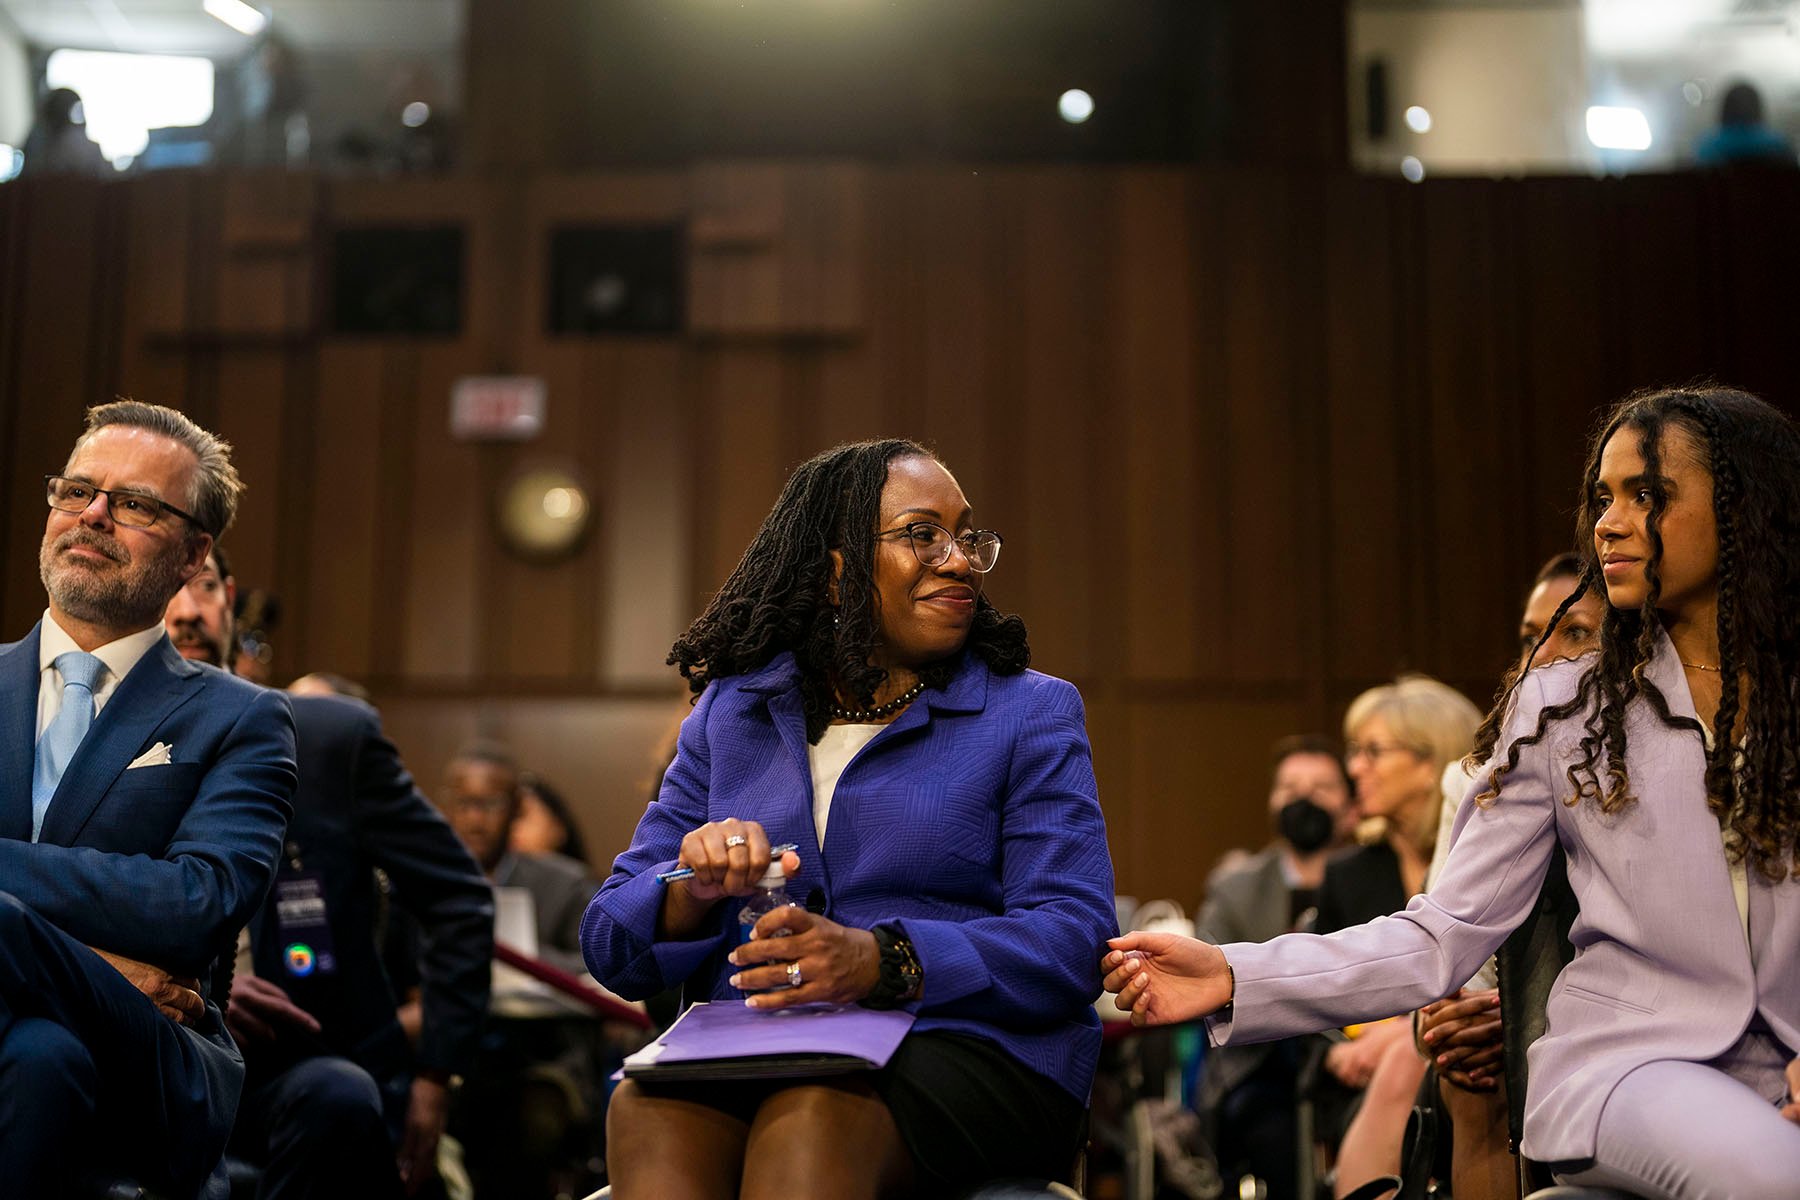 Supreme Court nominee Judge Ketanji Brown Jackson turns to her daughter Leila Jackson, who reached out to touch her arm as Judge Jackson joins her family in the audience area during her Senate Judiciary Committee confirmation hearing.